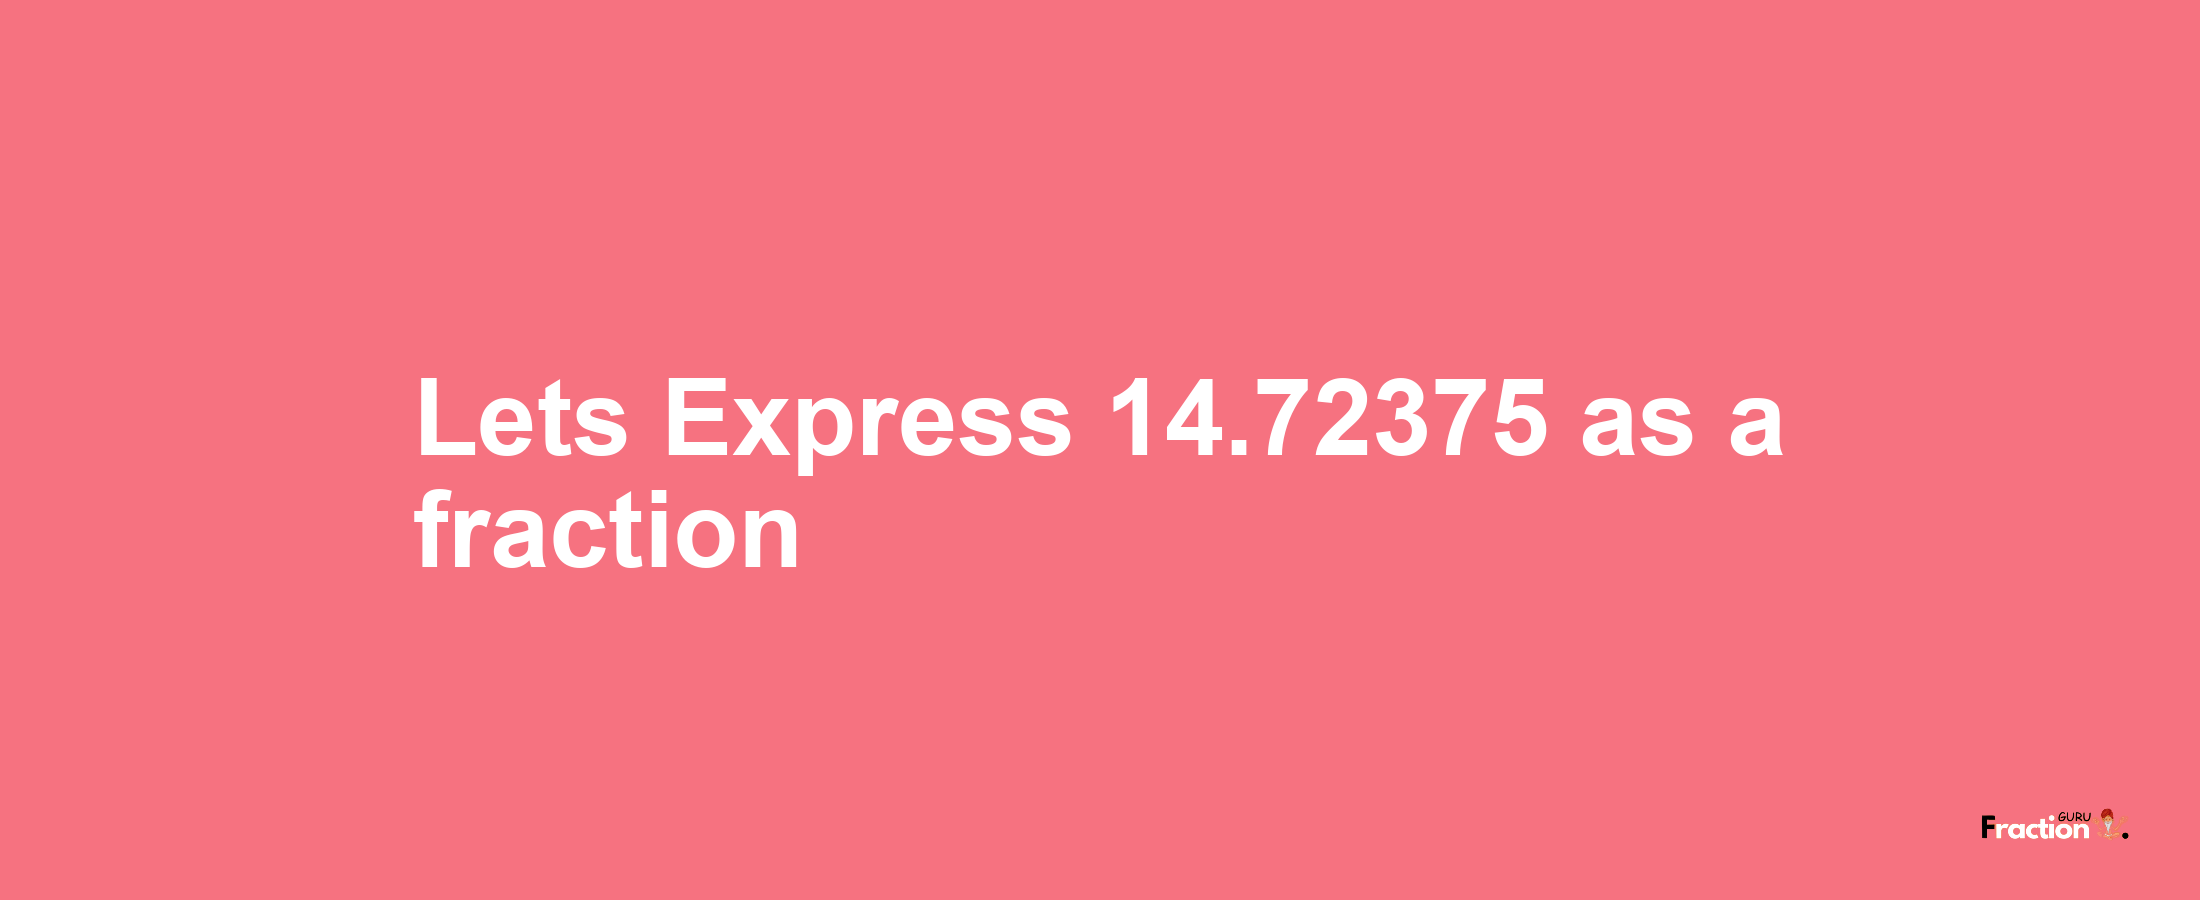 Lets Express 14.72375 as afraction